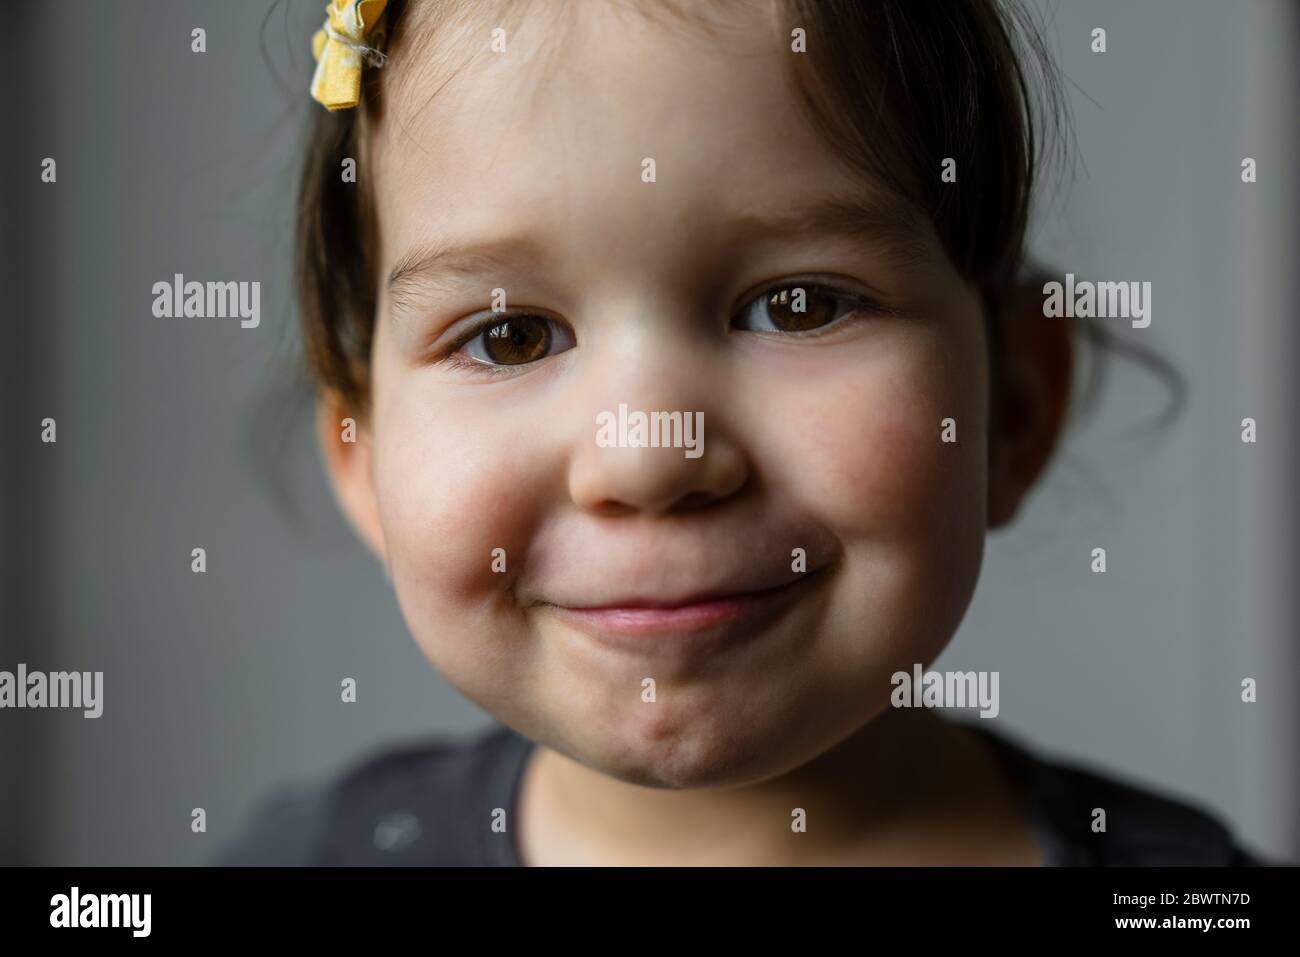 Portrait of smiling little girl with brown eyes Stock Photo